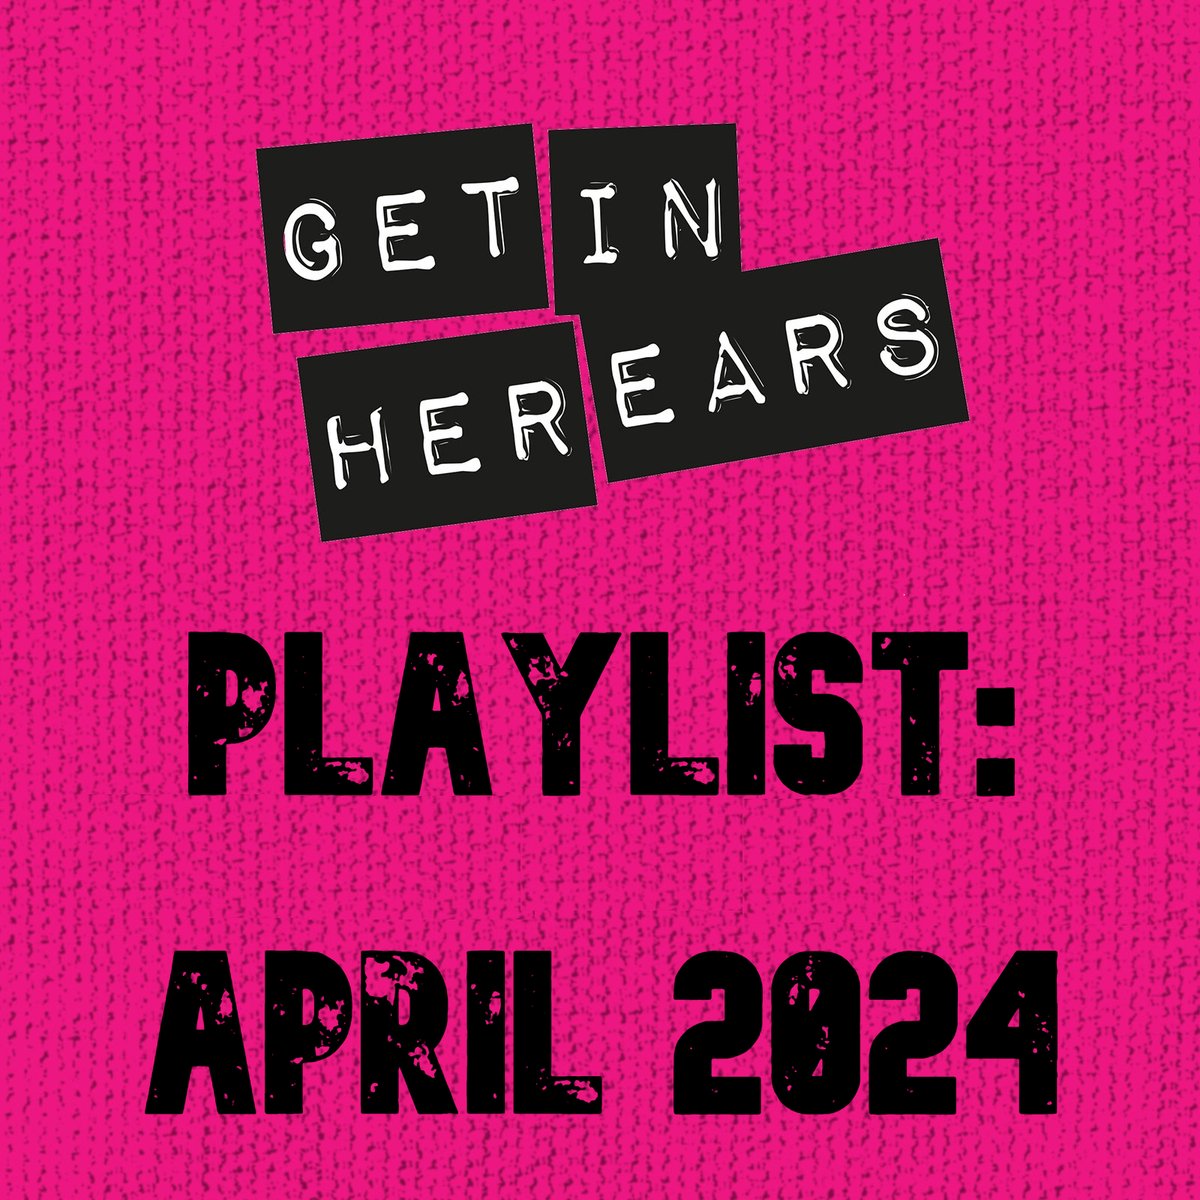 Just in time...get our April #NewMusic Playlist in your ears! 🎧 Ft. tracks by @frau13in, @kinghannahmusic, @xhumaninterestx, Glixen, @kynsy___, @mayalakhani_, @softcultband, @Lambrini_Girls, @queencultband, Julie Christmas & more! Listen here: getinherears.com/2024/04/30/pla…